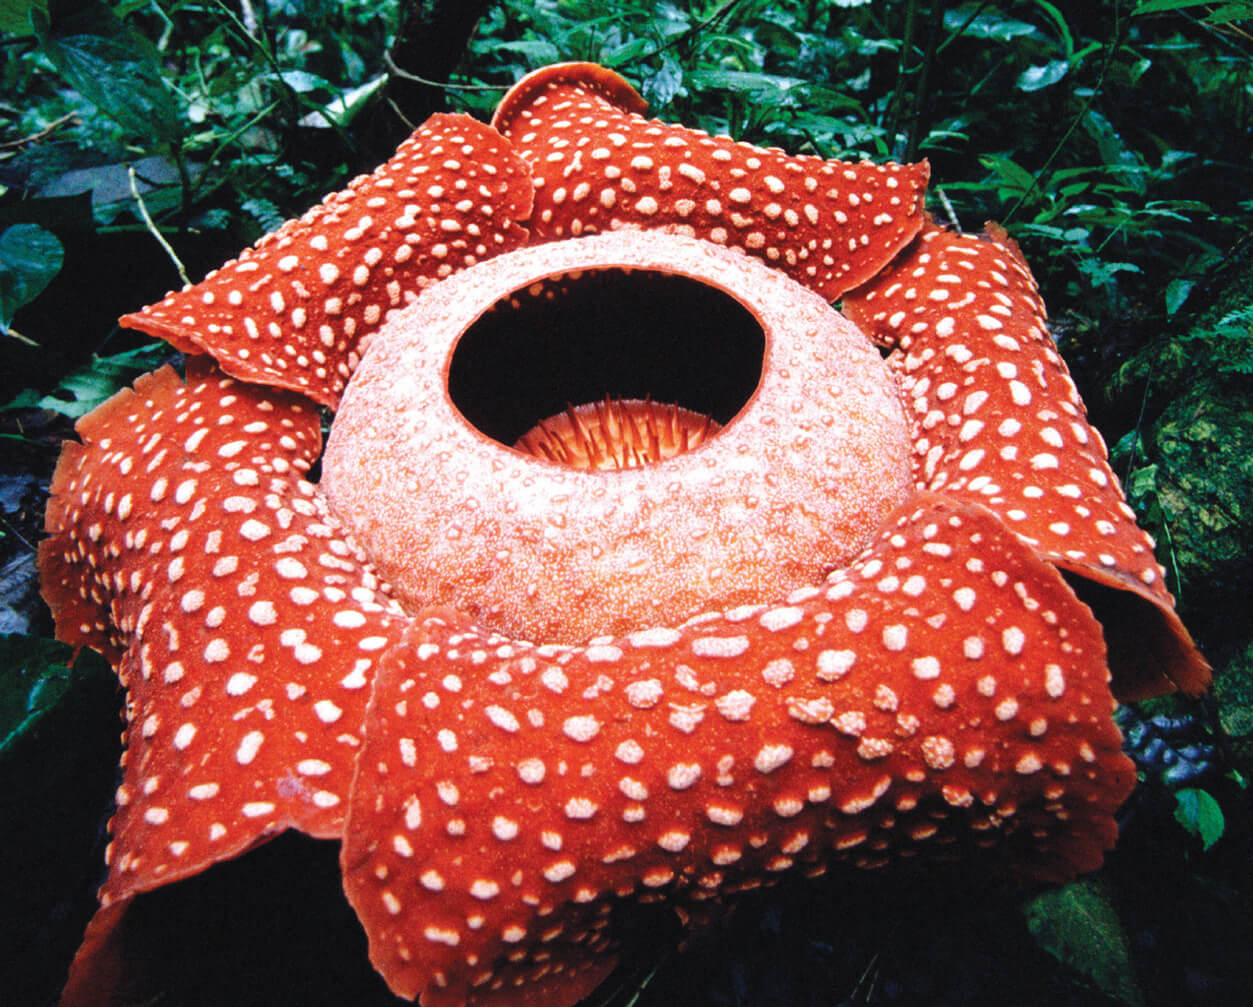 A photograph of “Rafflesia arnoldii”, a large, red flower. 